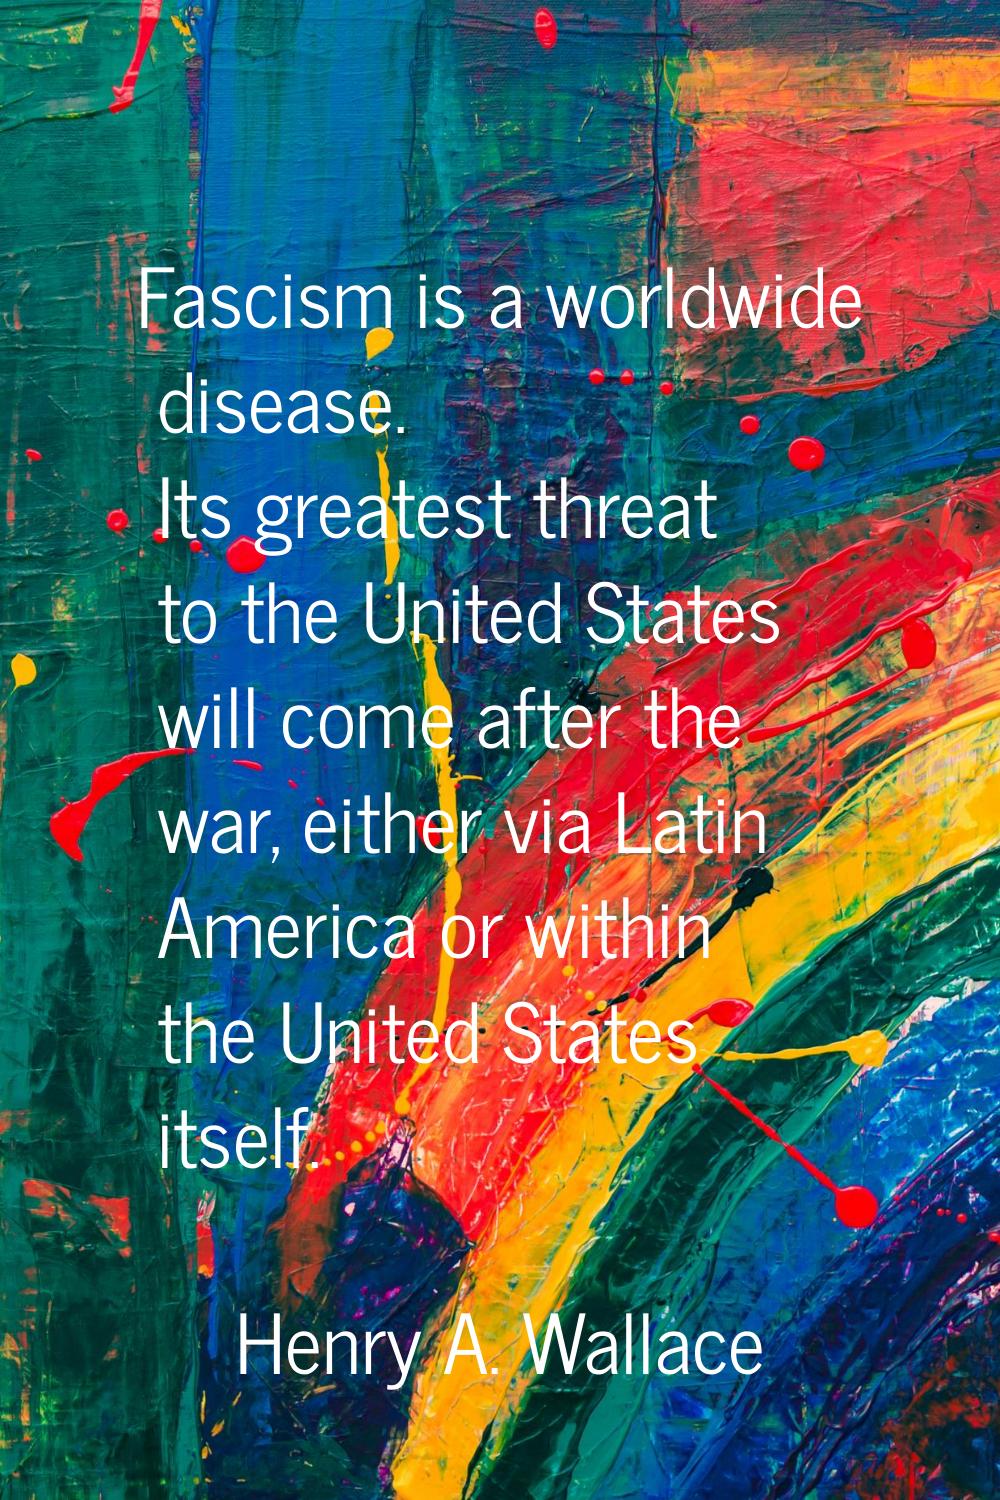 Fascism is a worldwide disease. Its greatest threat to the United States will come after the war, e